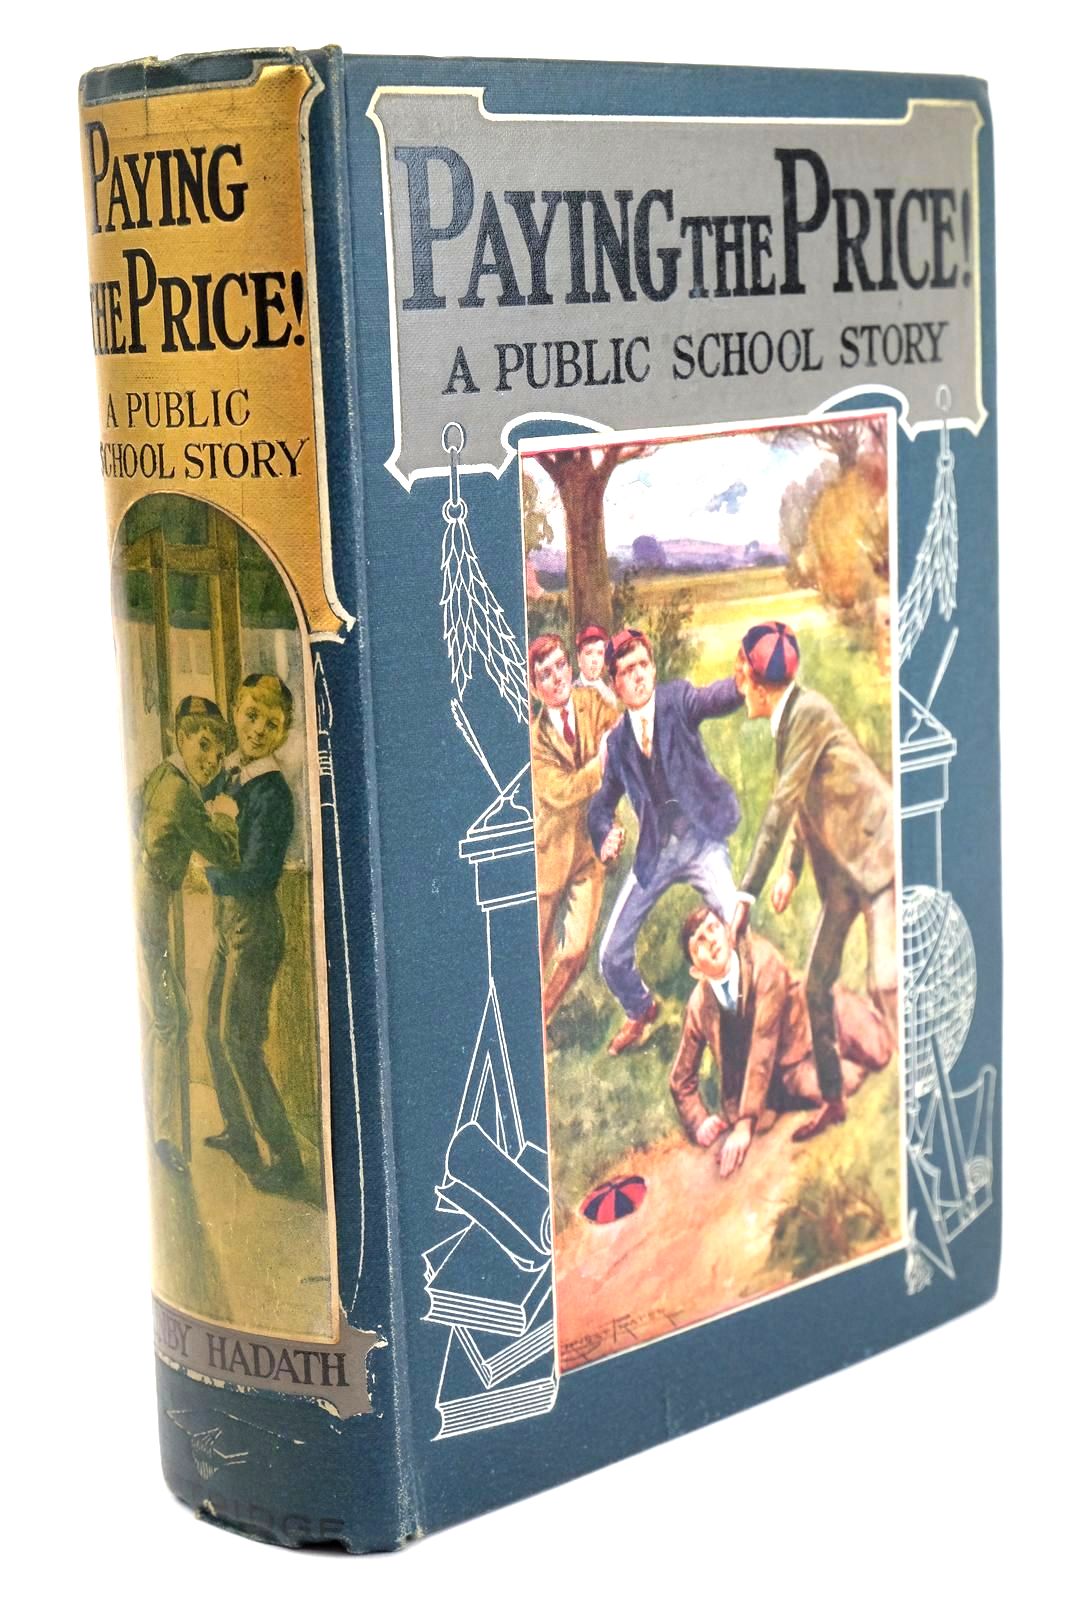 Photo of PAYING THE PRICE! written by Hadath, Gunby illustrated by Prater, Ernest published by S.W. Partridge & Co. Ltd. (STOCK CODE: 1324454)  for sale by Stella & Rose's Books